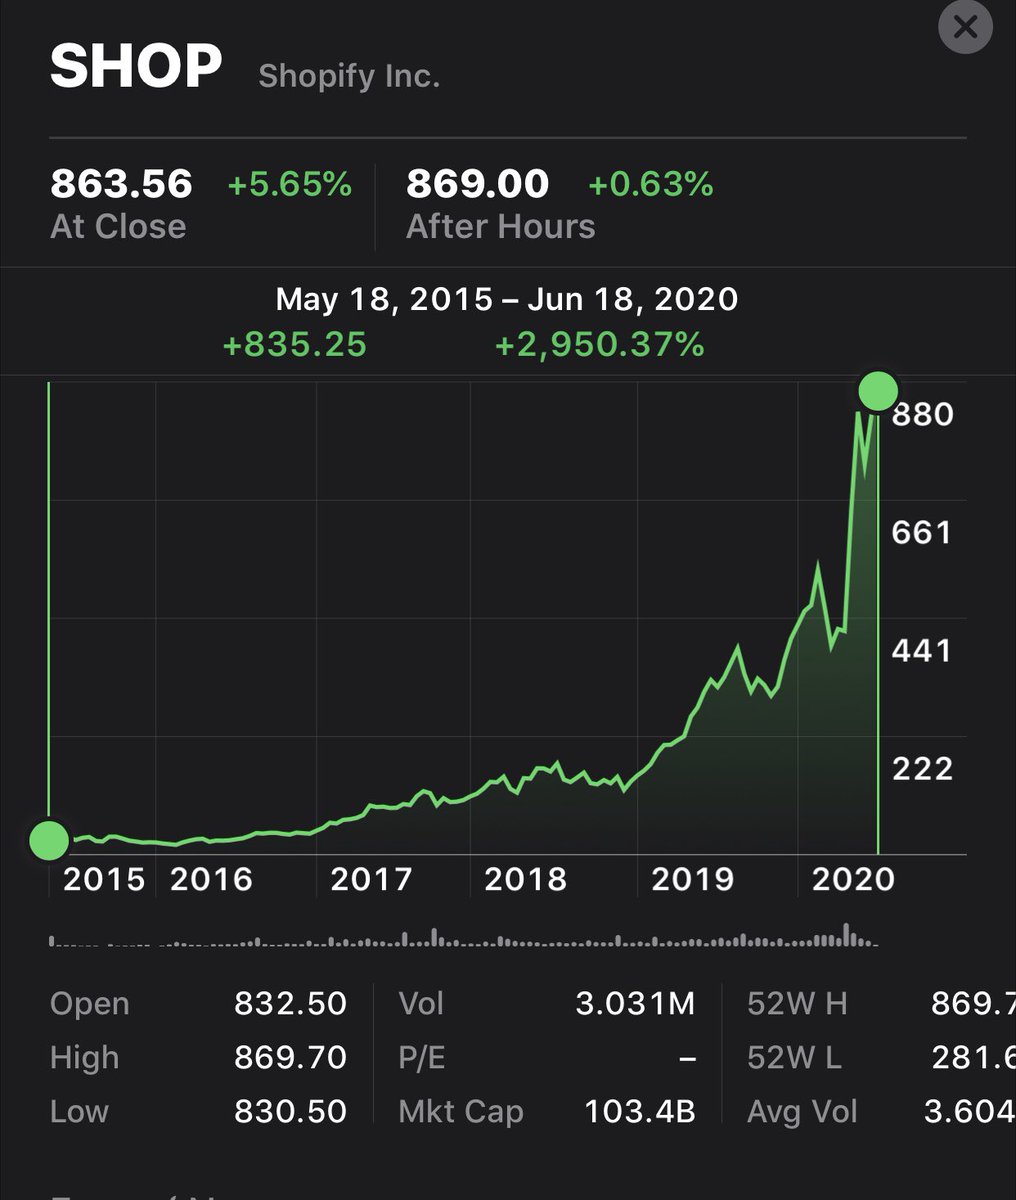 Shopify’s growth has been remarkable:- $100B+ market cap, Canada’s largest company - $70B GMV growing 46% - 6X revenue growth over past 5 years - 1M merchants growing 35%  - Stock returns: +2,350% 5Y, +500% 2Y, +173% 1Y - 6% US eComm share, #2 to Amazon at 38%